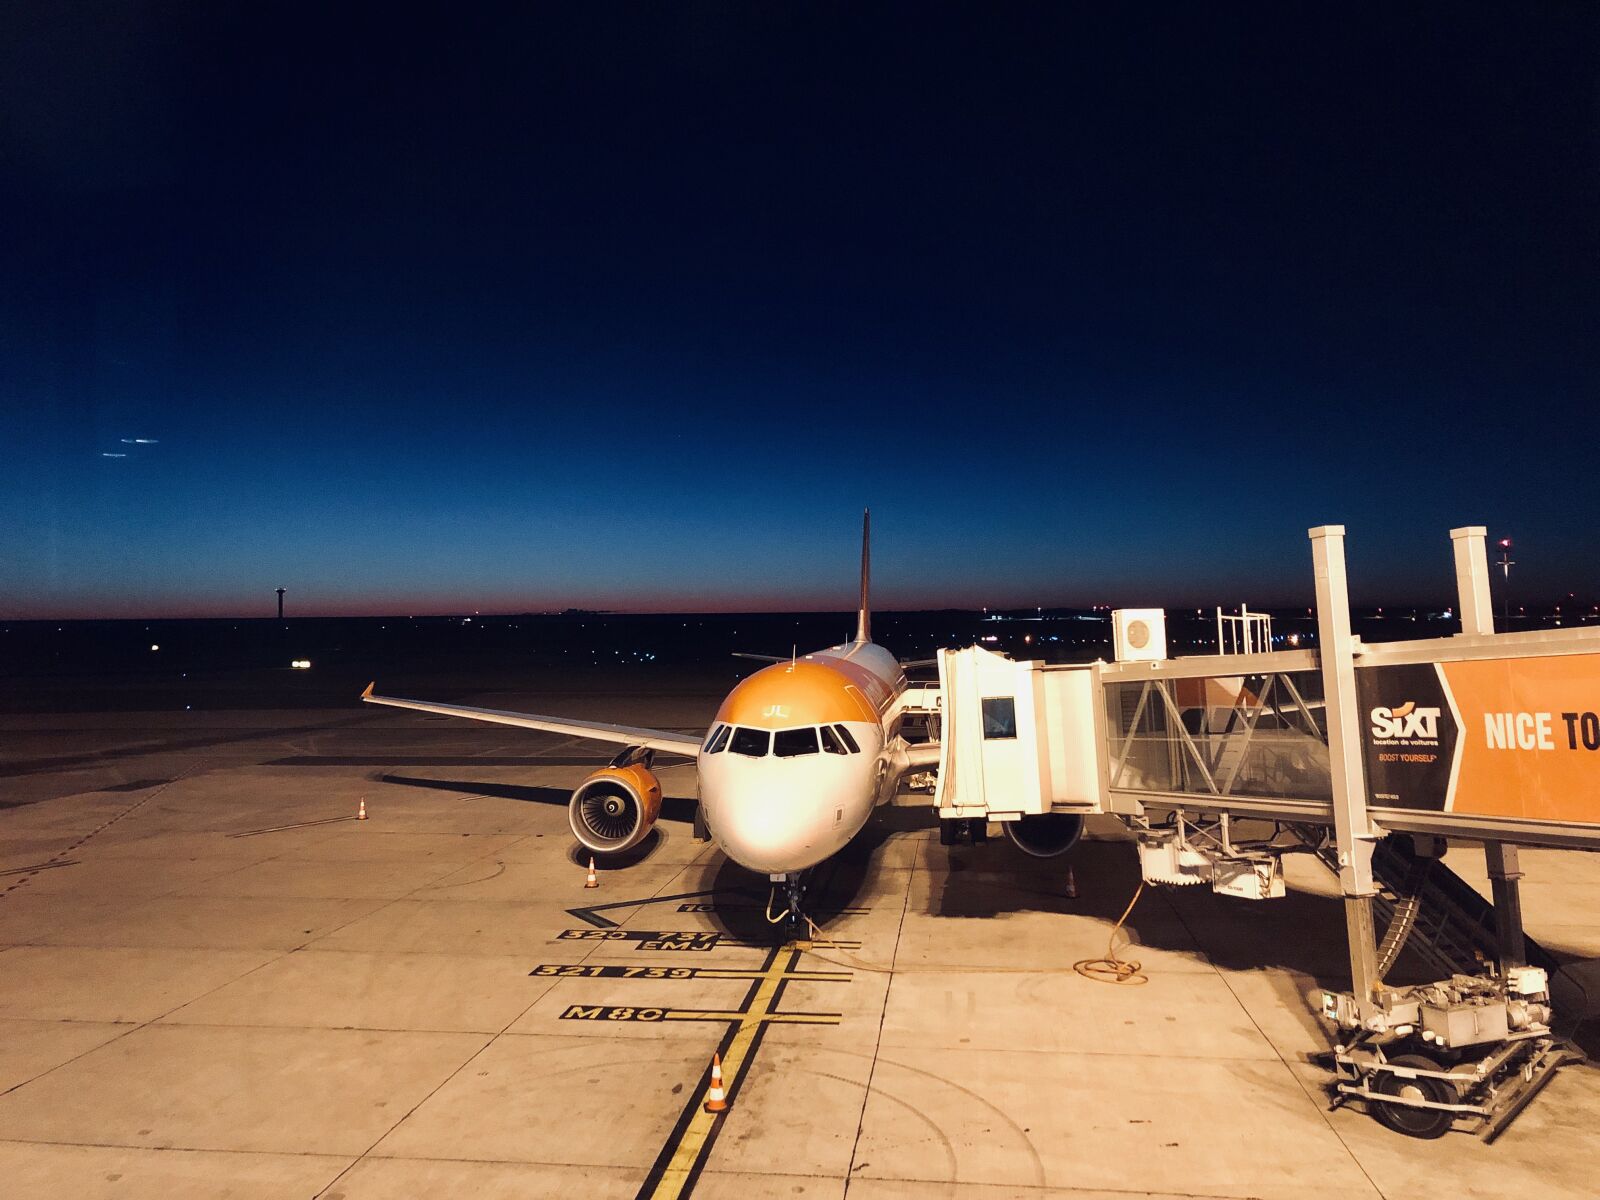 Apple iPhone 8 Plus sample photo. Aircraft, airport, travel photography